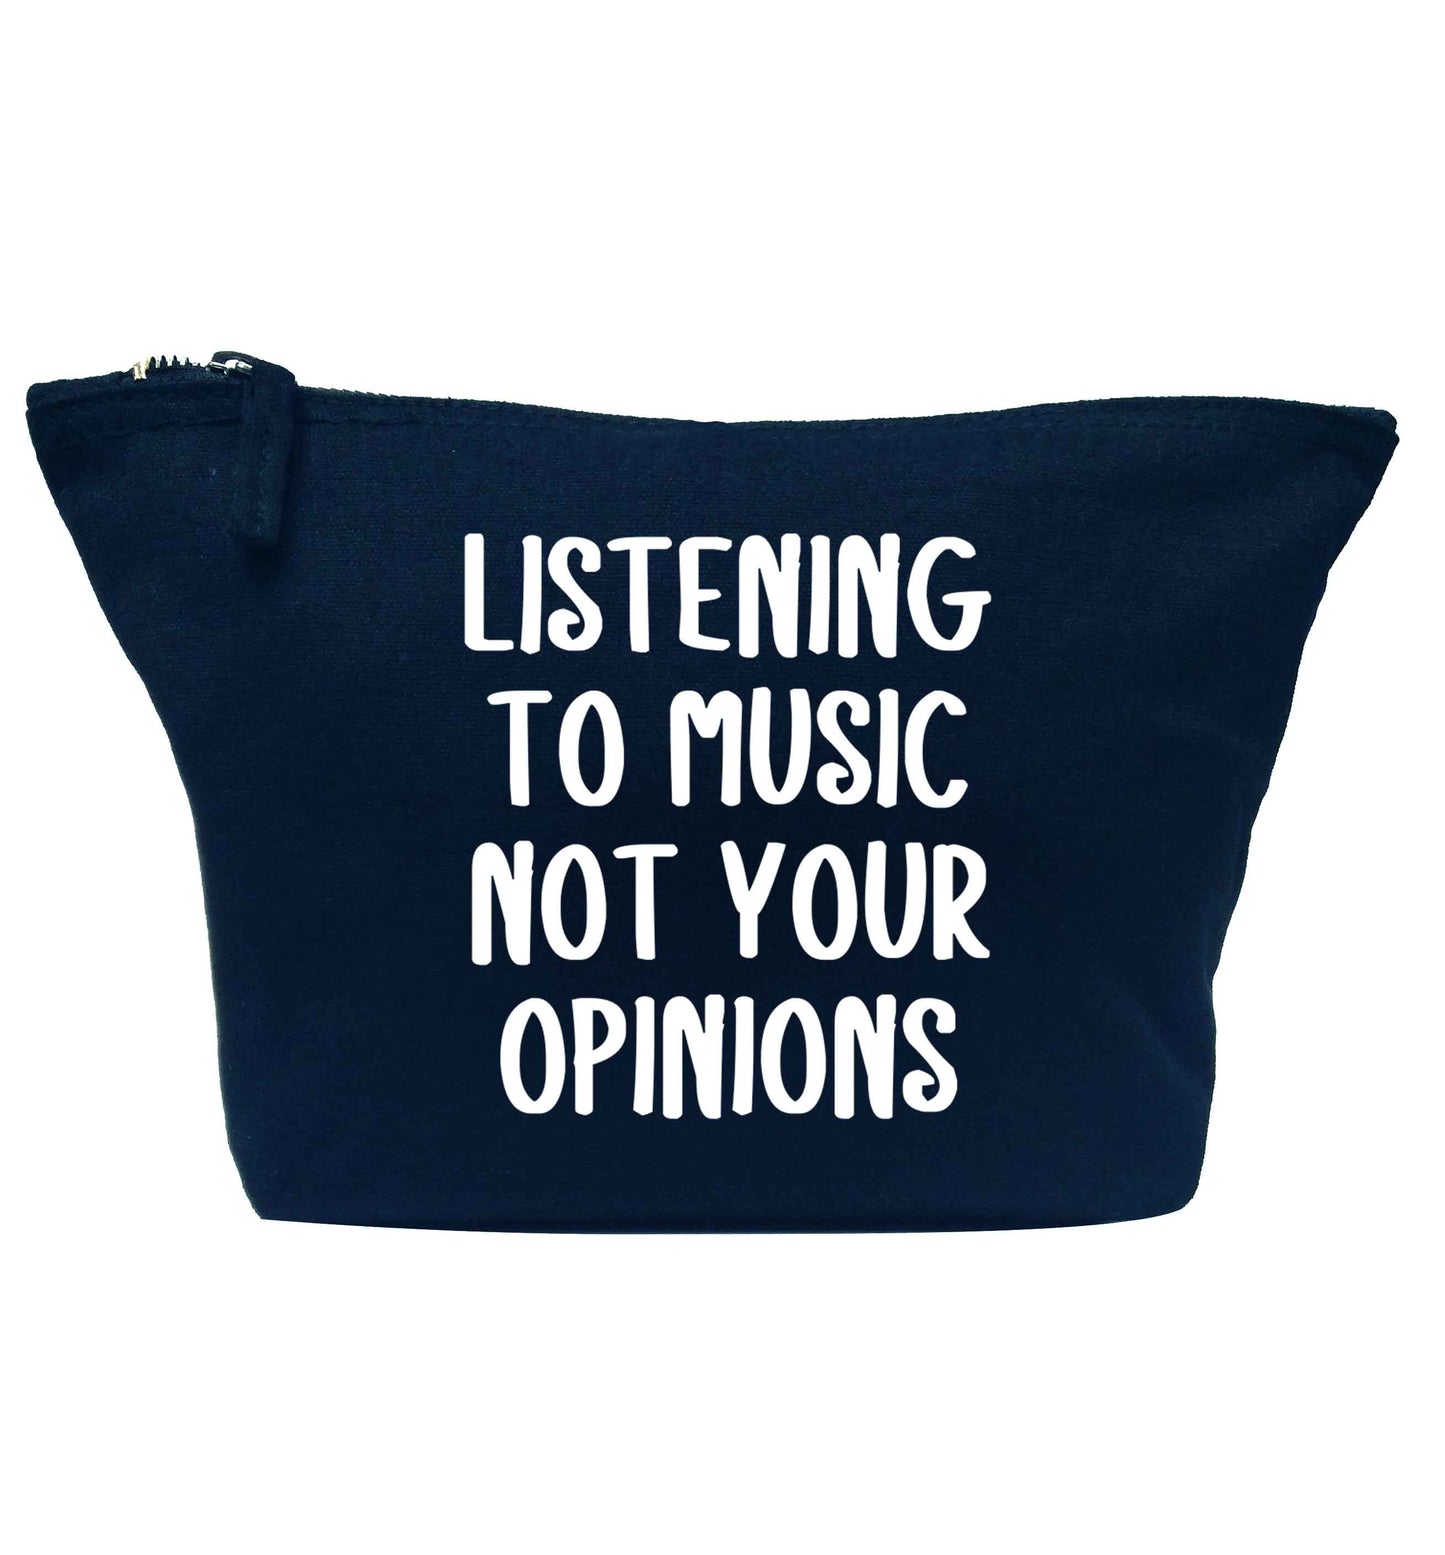 Listening to music not your opinions navy makeup bag